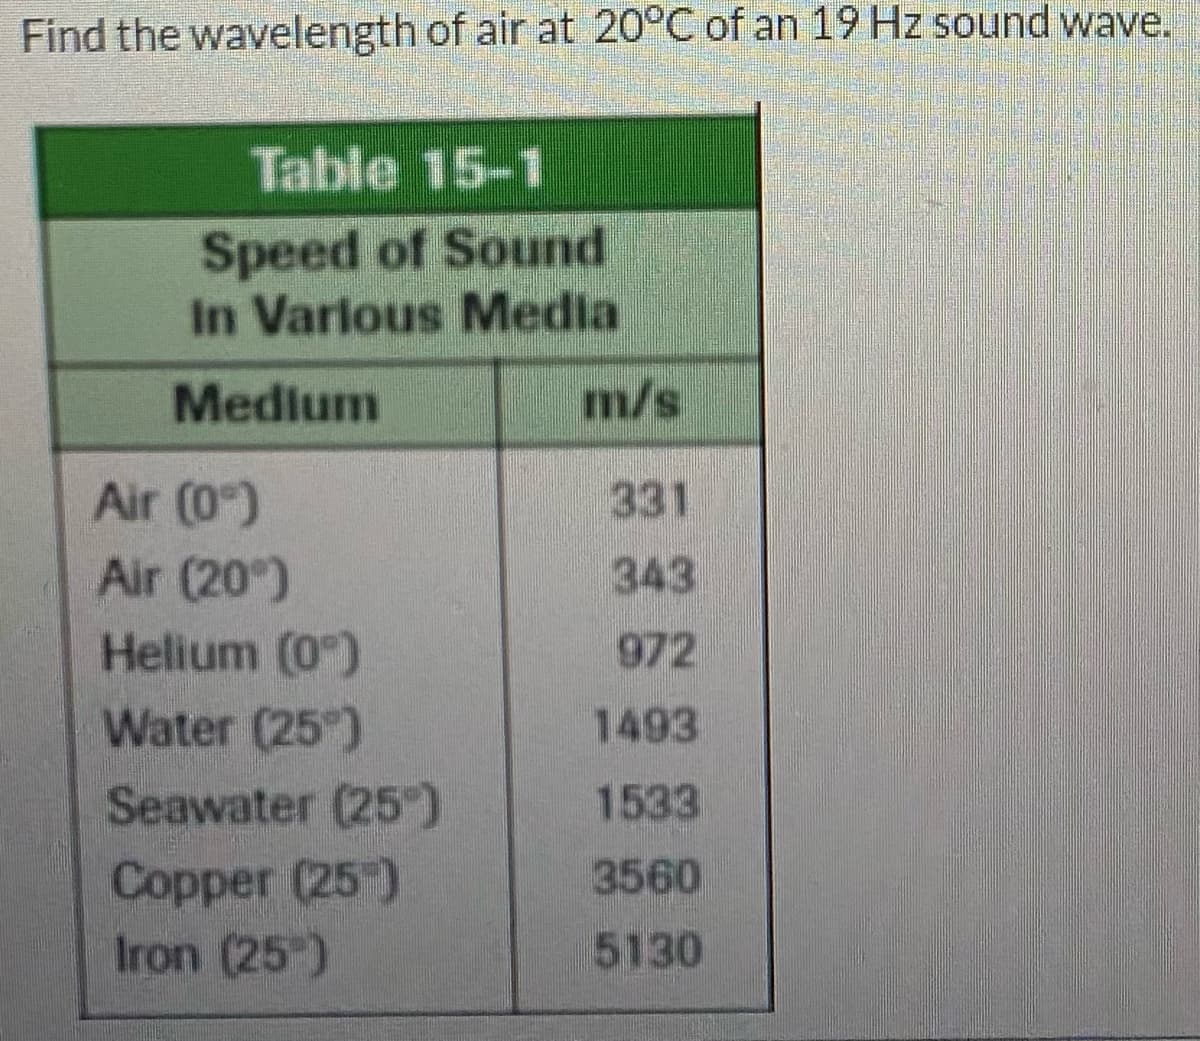 Find the wavelength of air at 20°C of an 19 Hz sound wave.
Table 15-1
Speed of Sound
In Varlous Media
Medlum
m/s
Air (0)
331
Air (20°)
Helium (0")
343
972
Water (25)
1493
Seawater (25
1533
3560
Copper (25")
Iron (25)
5130
